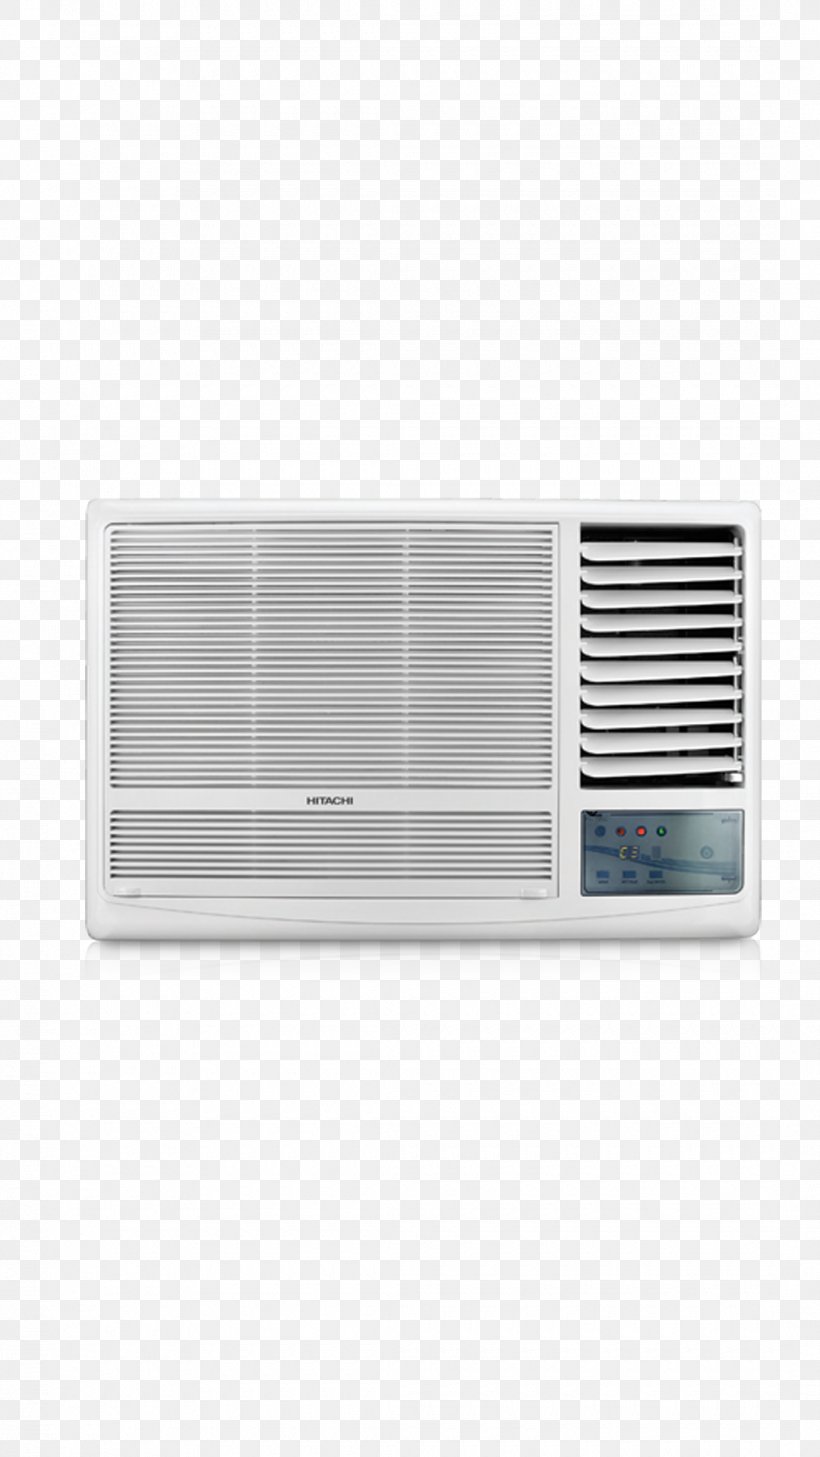 Air Conditioning Hitachi Carrier Corporation Ton Condenser, PNG, 1080x1920px, Air Conditioning, Business, Carrier Corporation, Condenser, Hitachi Download Free